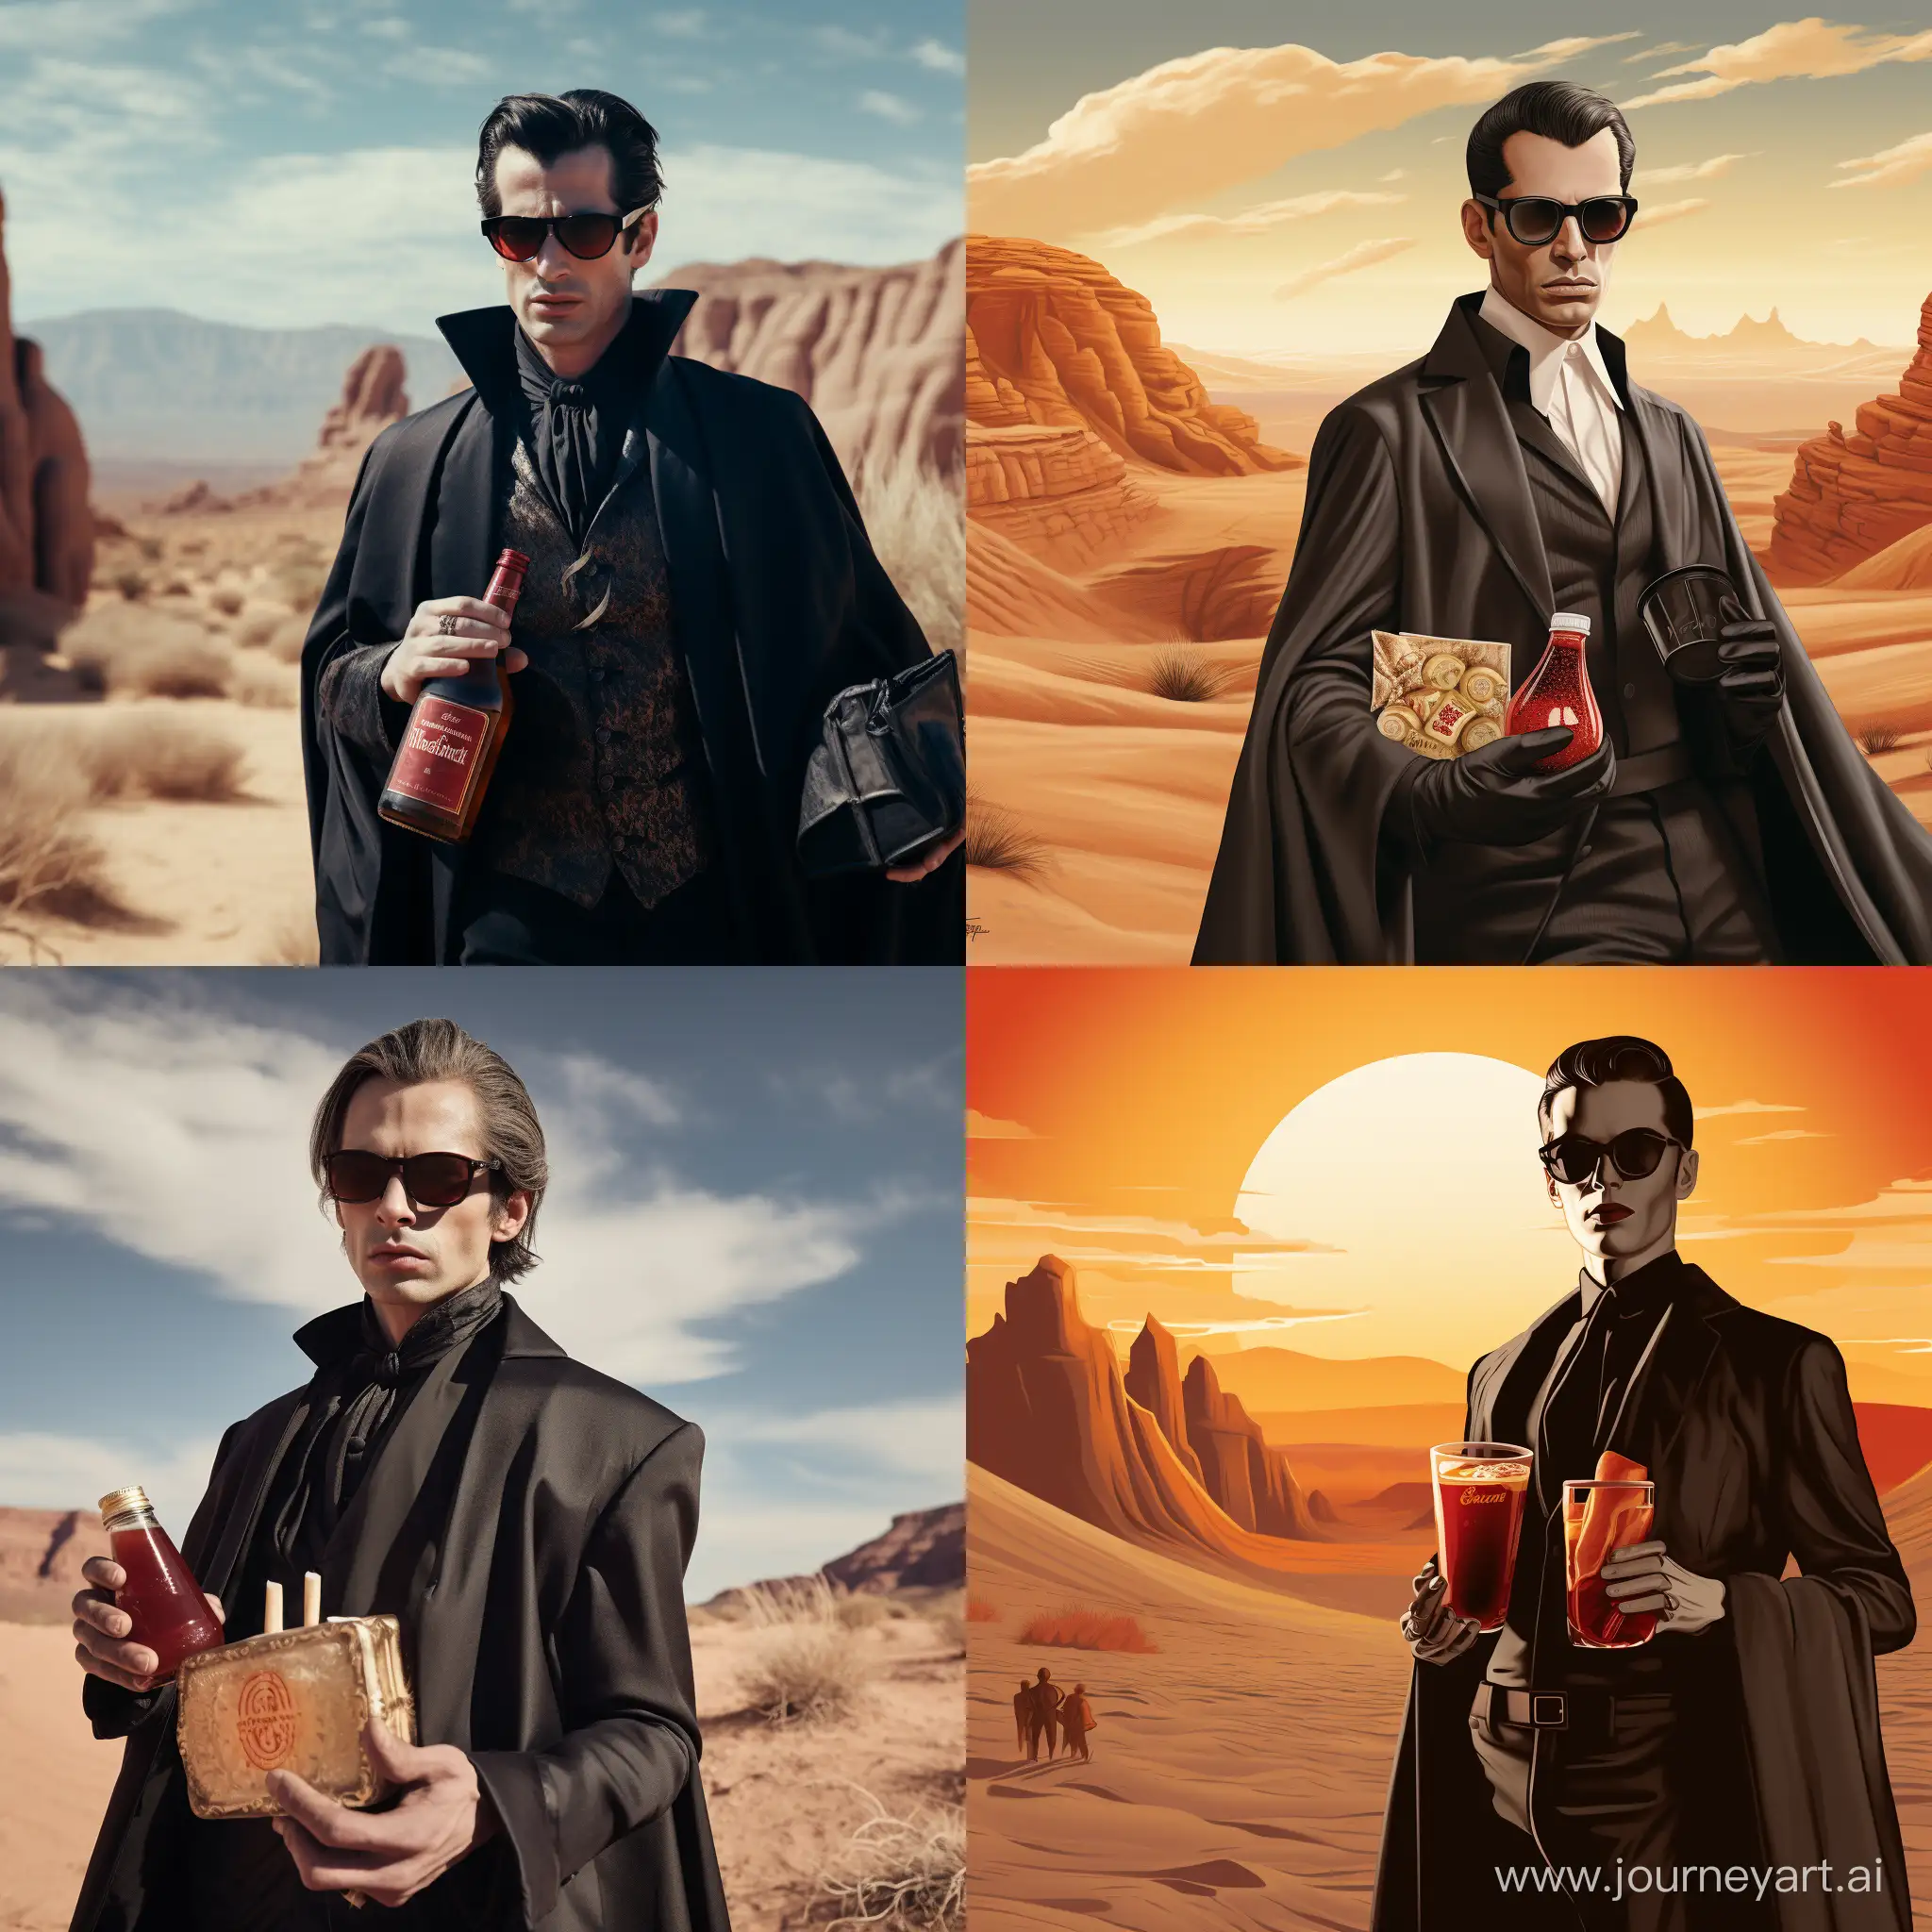 Count-Dracula-Strolls-Through-Desert-with-Hennessy-and-Newport-Cigarettes